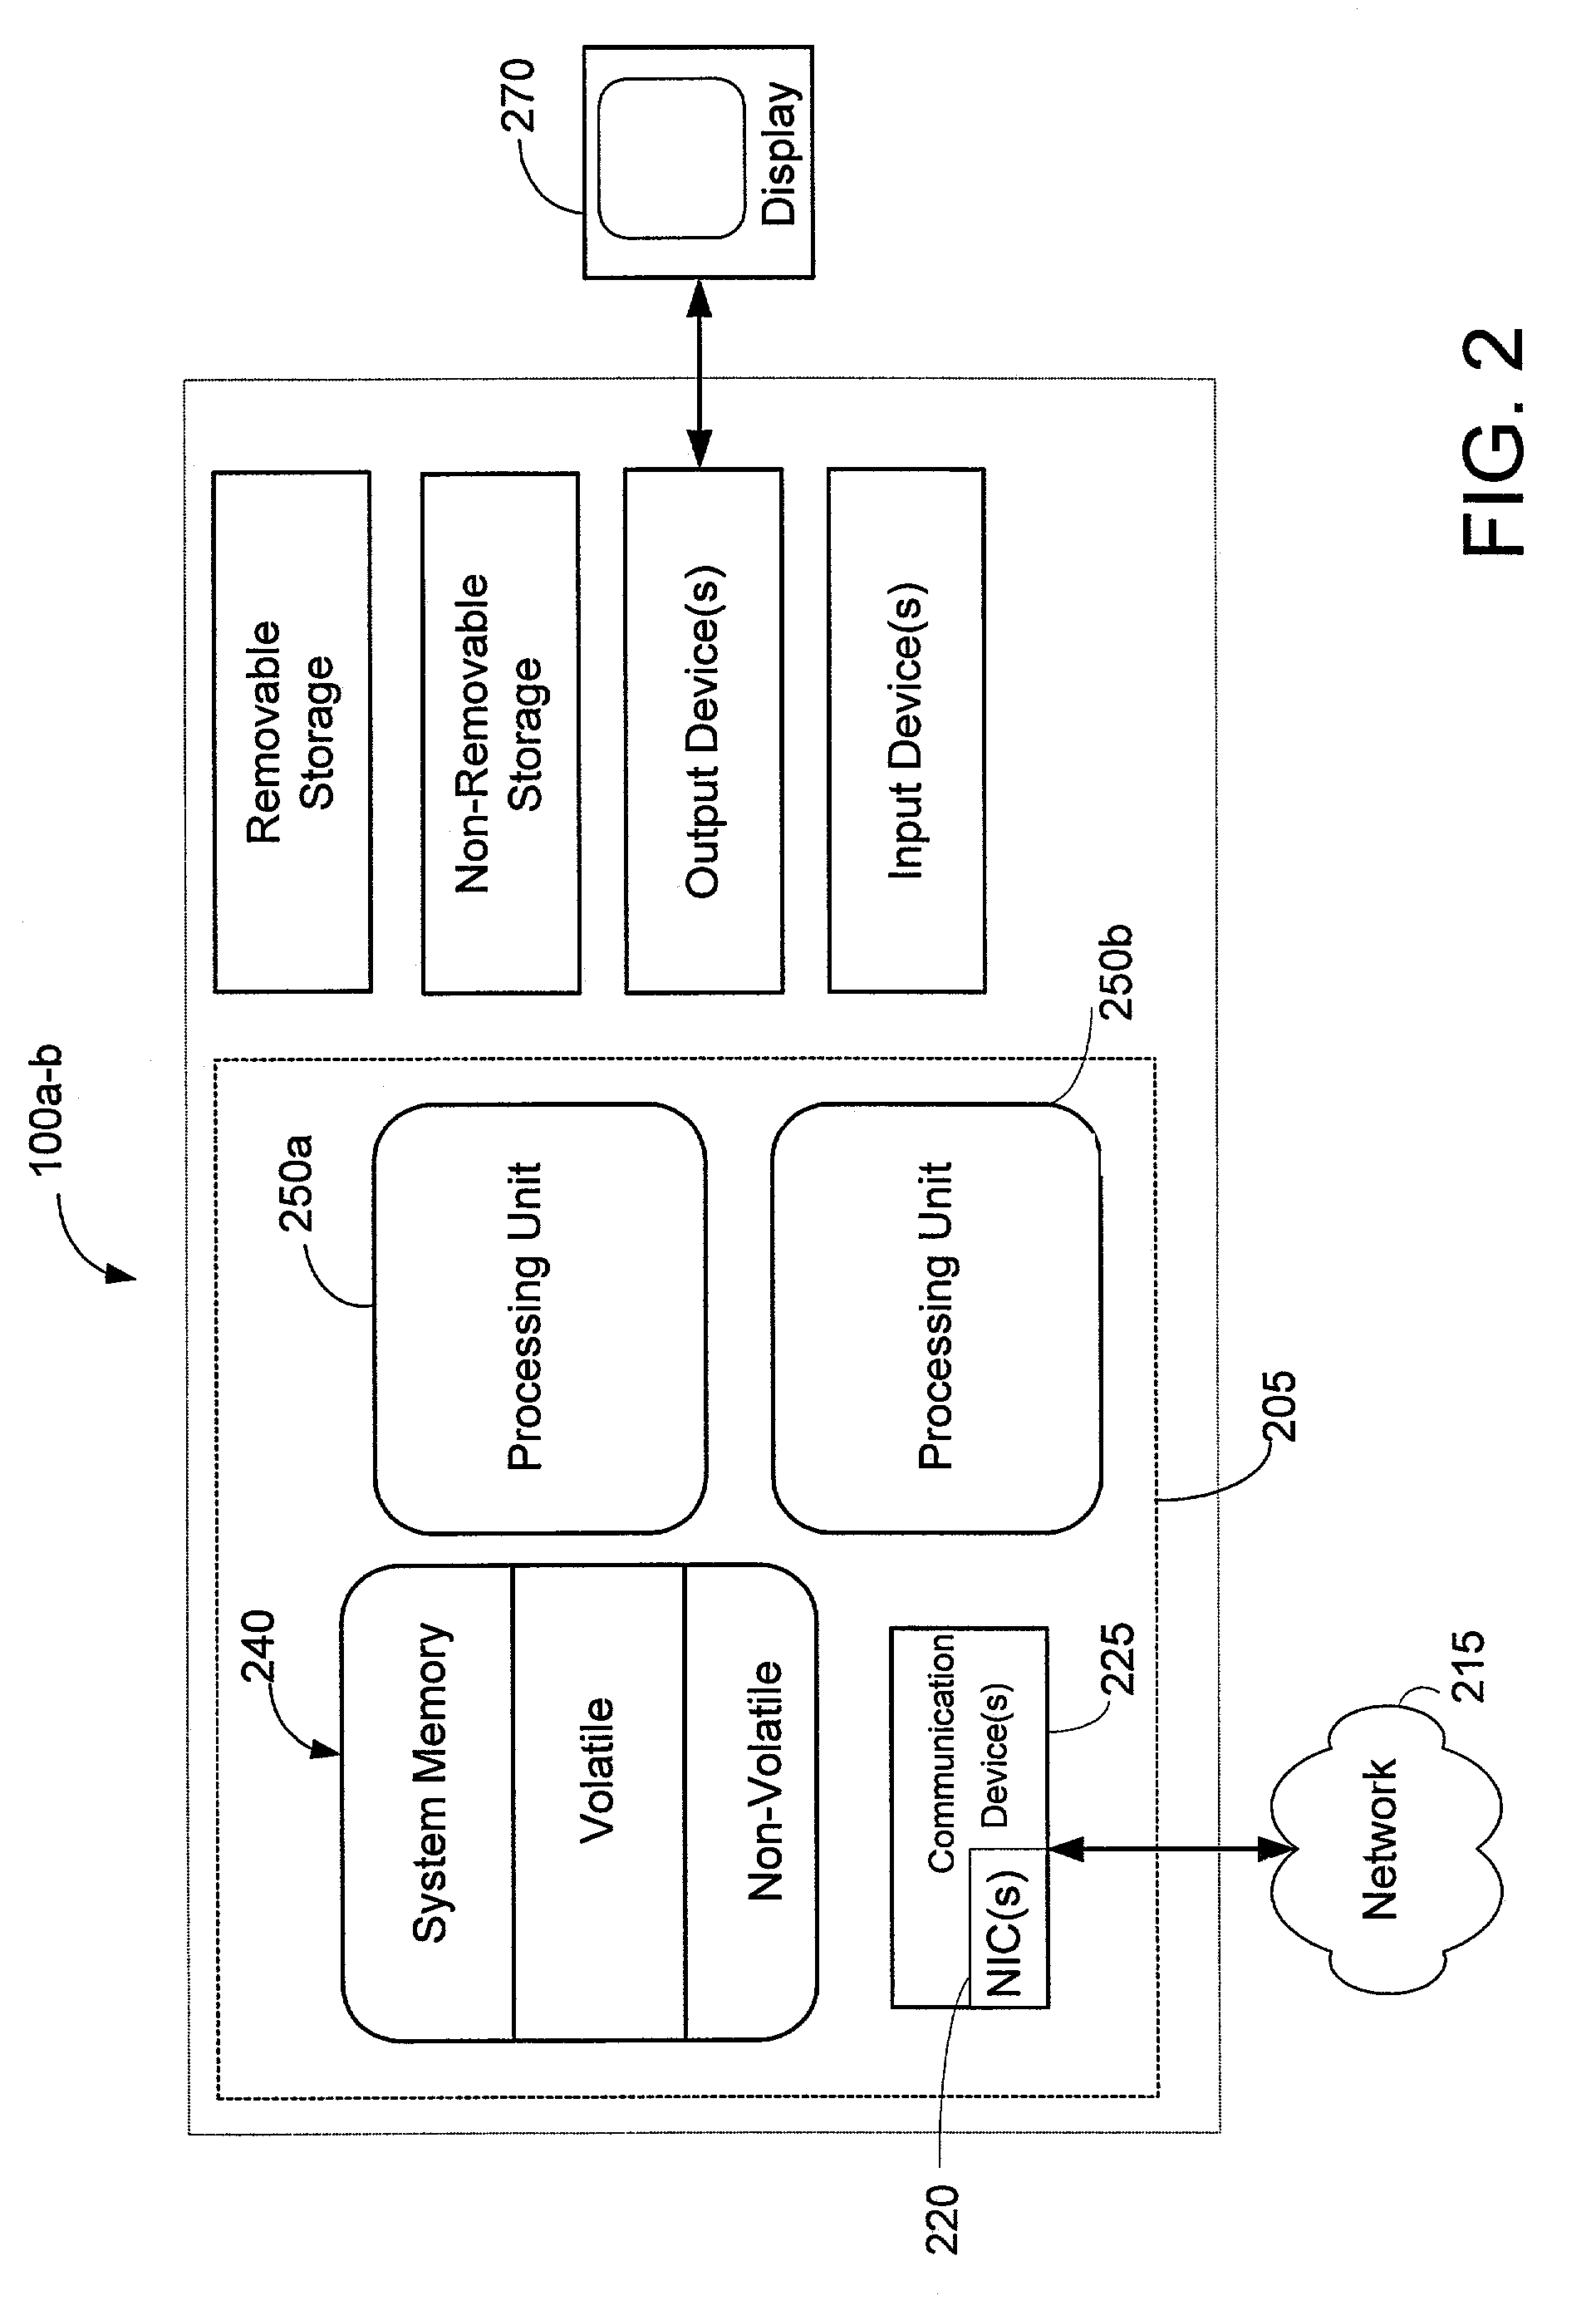 Symmetrical multiprocessing in multiprocessor systems